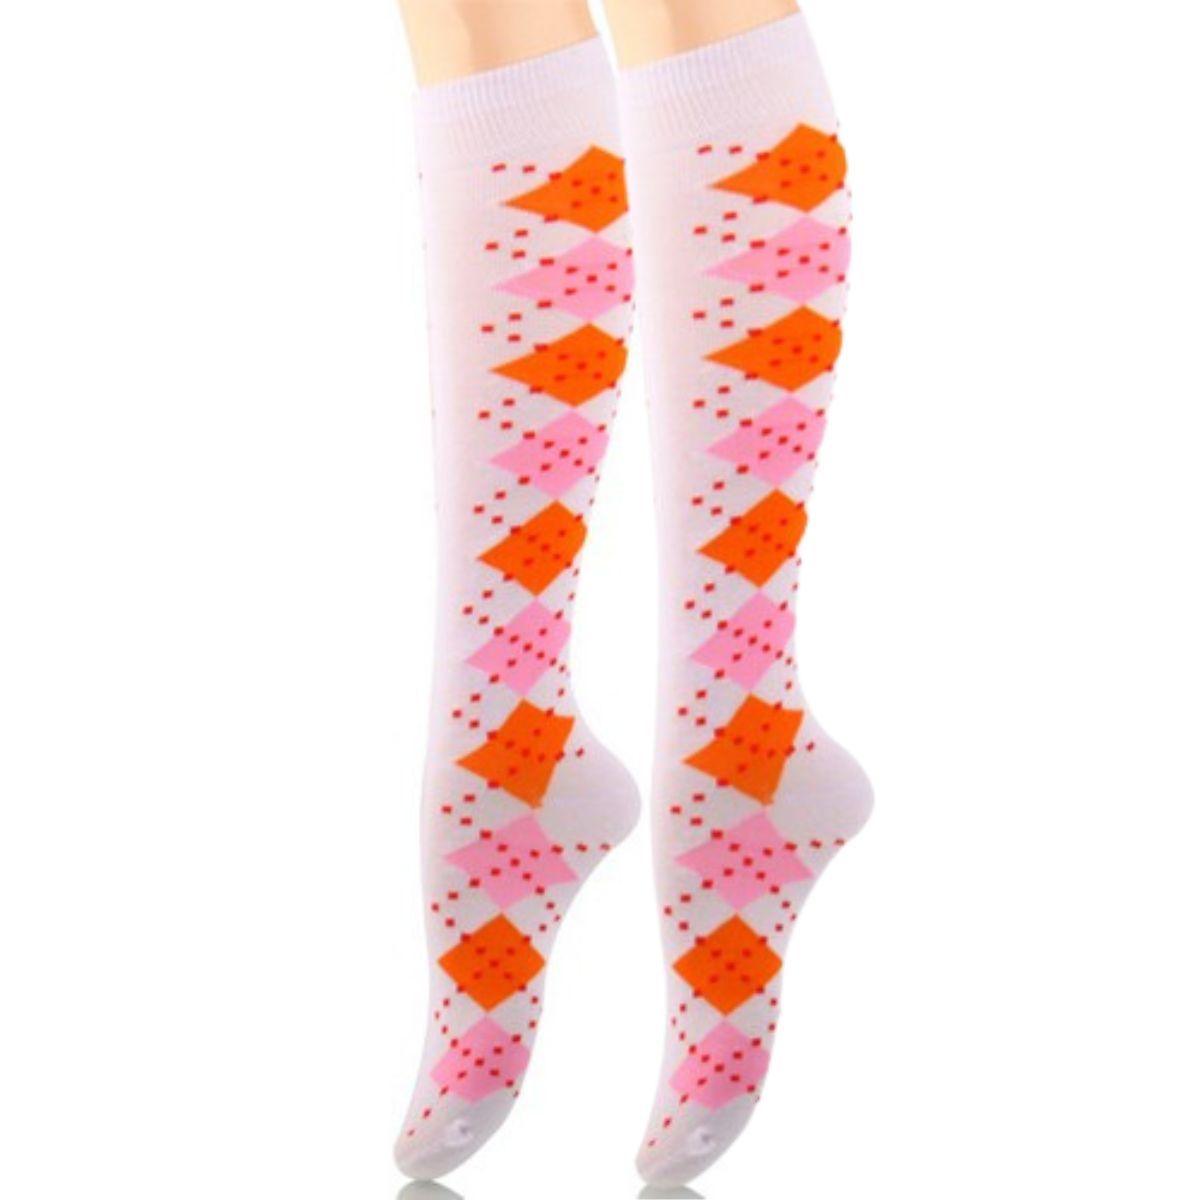 Get Noticed in Fun White Women's Socks with Dotted-Line Argyle